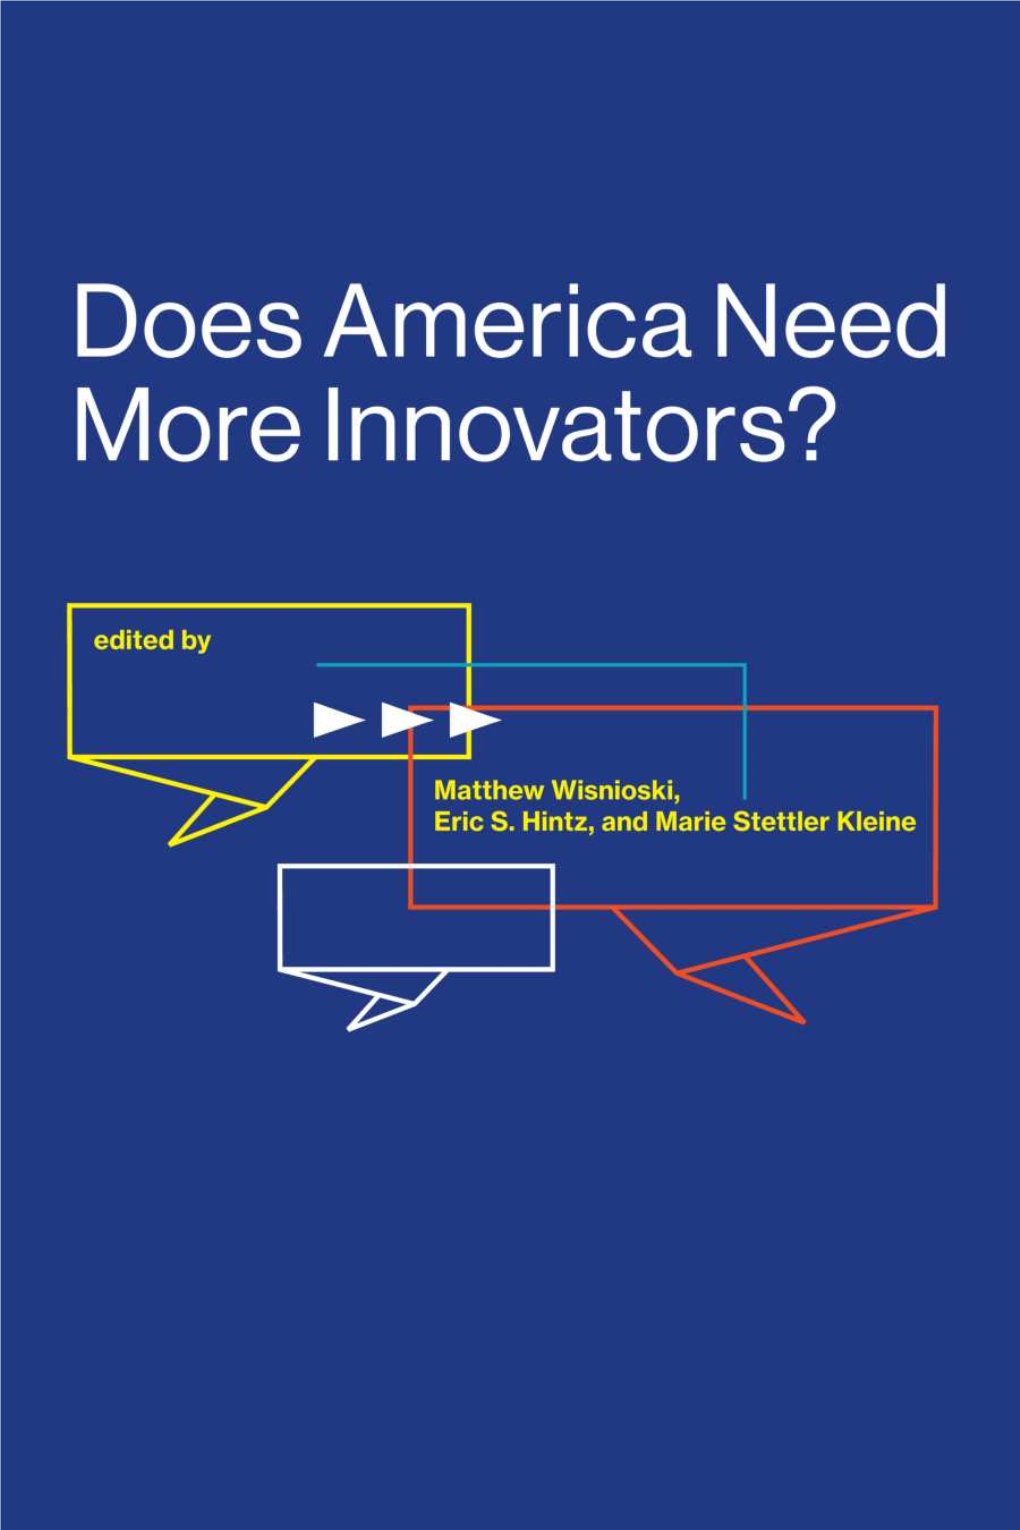 Does America Need More Innovators? Lemelson Center Studies in Invention and Innovation Joyce Bedi, Arthur Daemmrich, and Arthur P